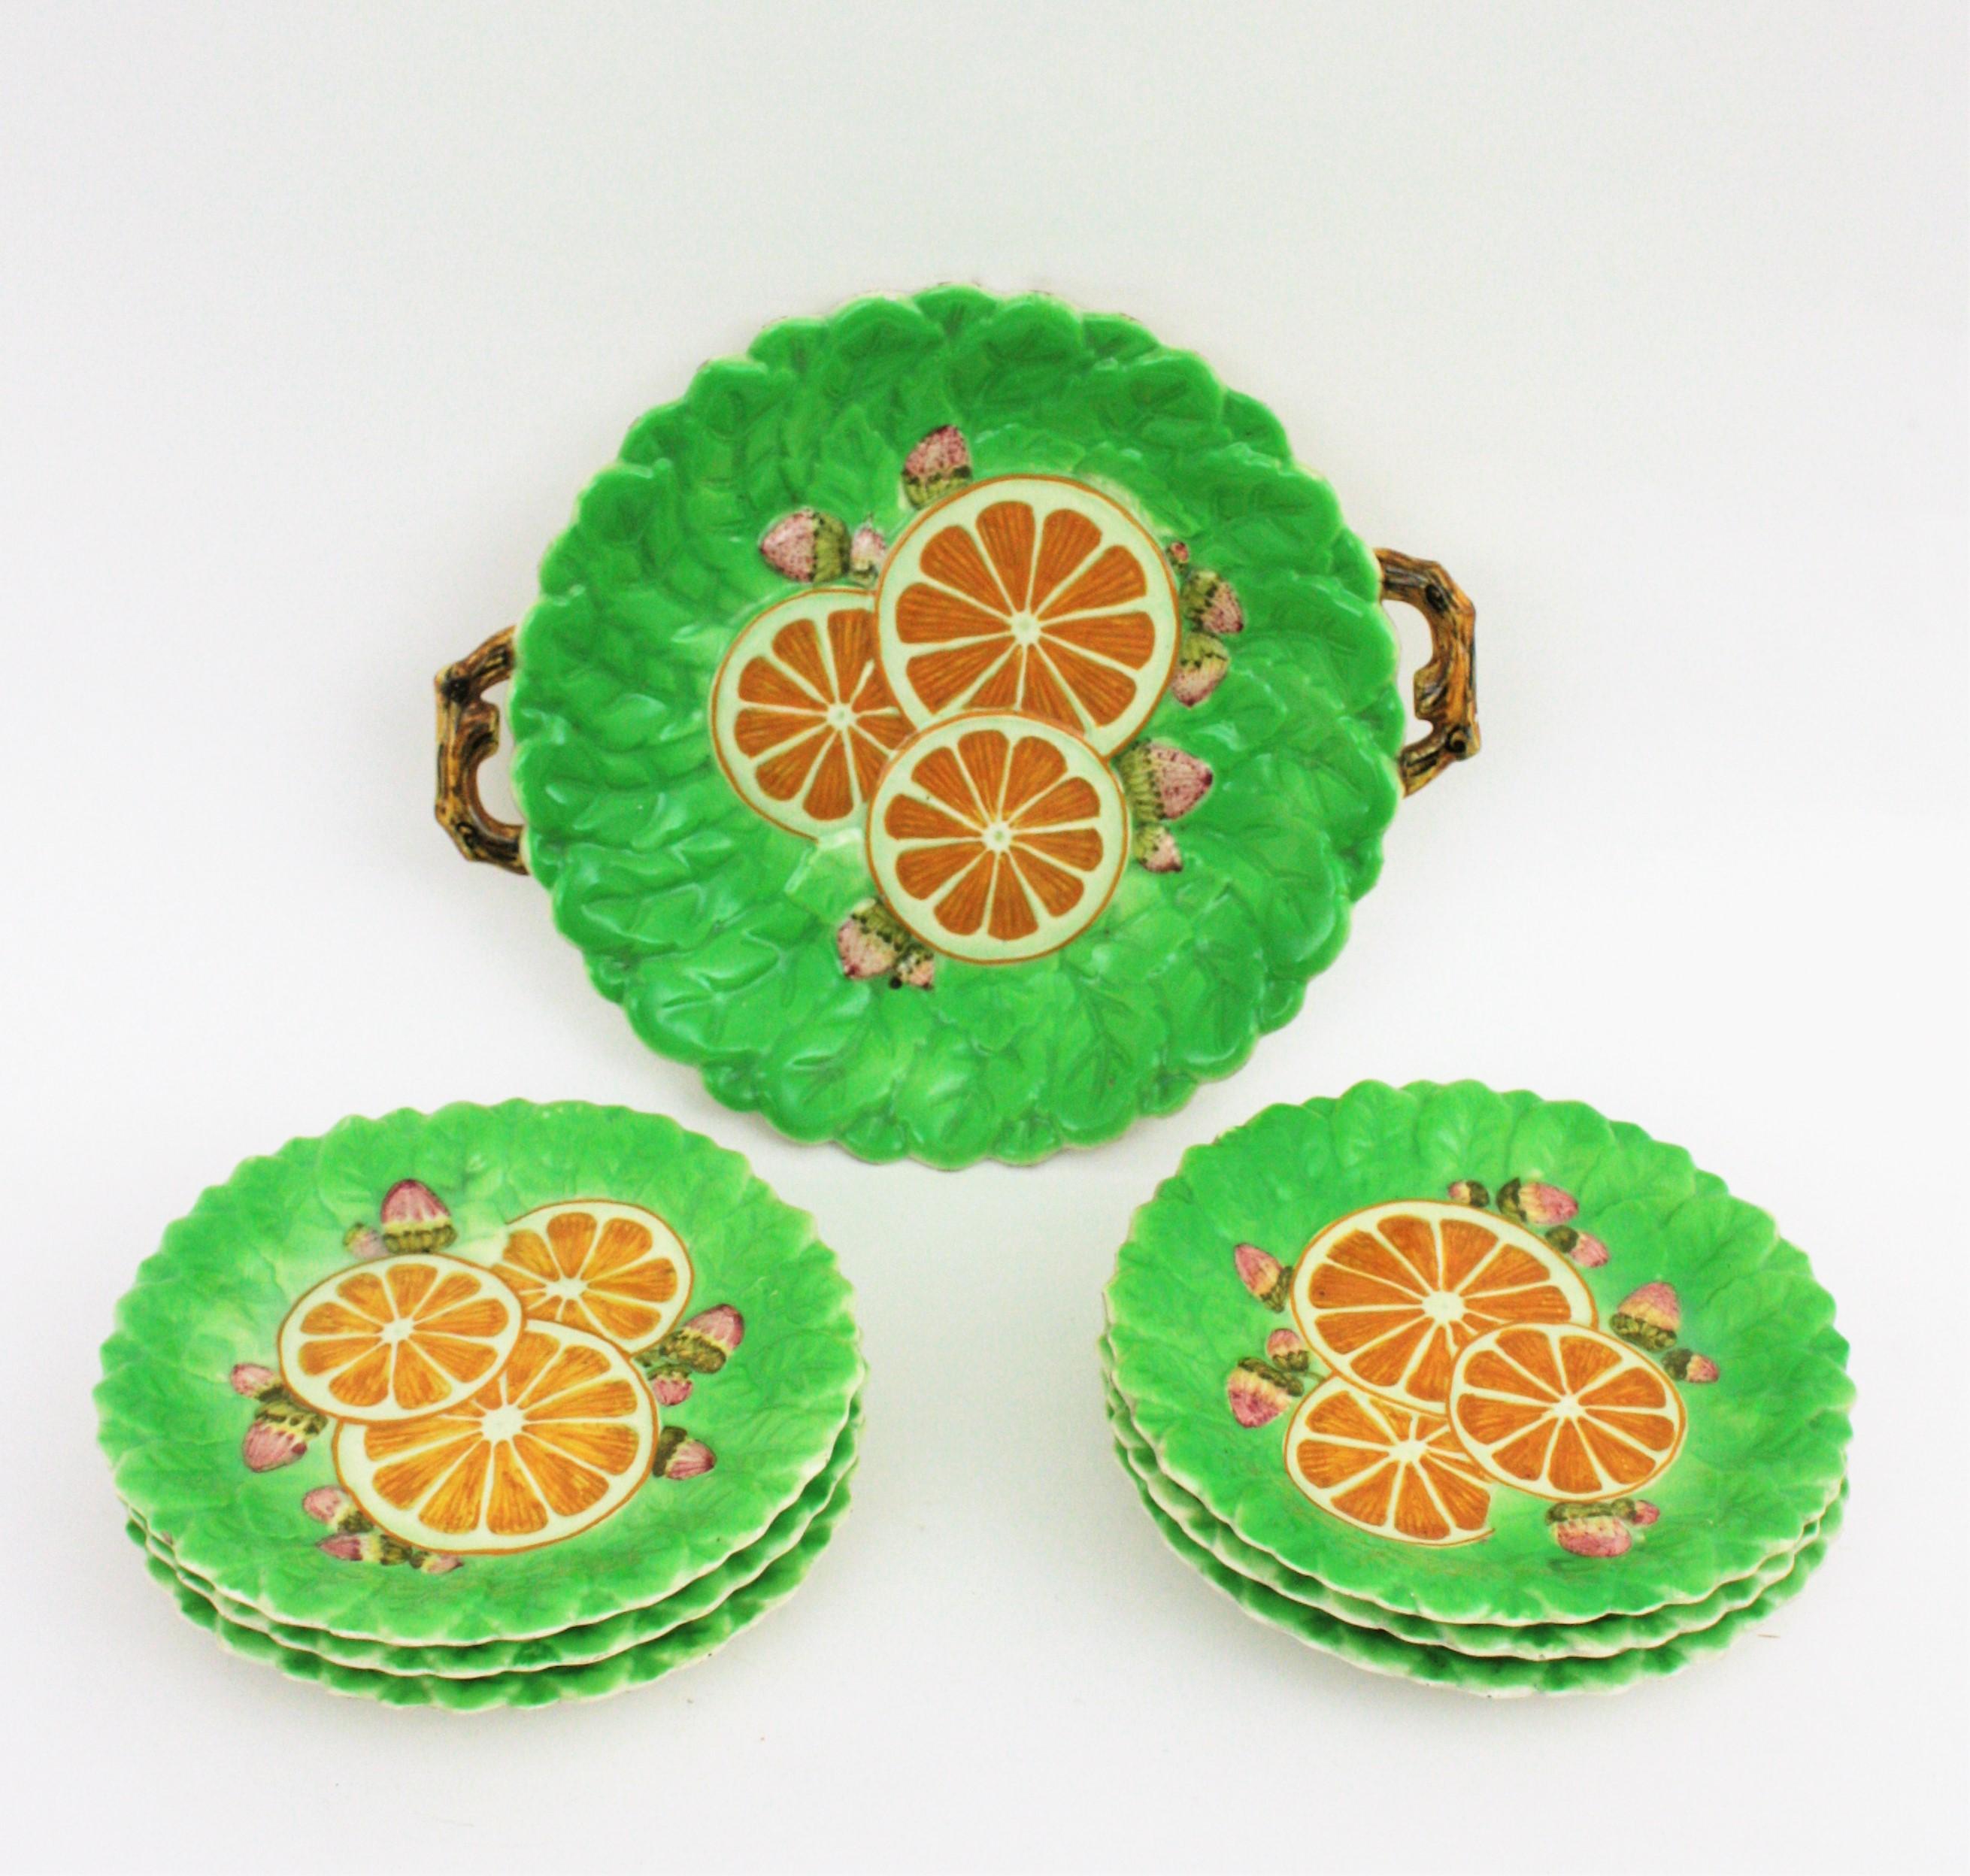 A beautiful glazed ceramic hand painted serving set, France, 1930s-1940s
Set includes 6 dishes and a large serving tray with handles at both sides.
All hand painted with oranges and strawberries scene on a green background. 
For breakfast or dessert